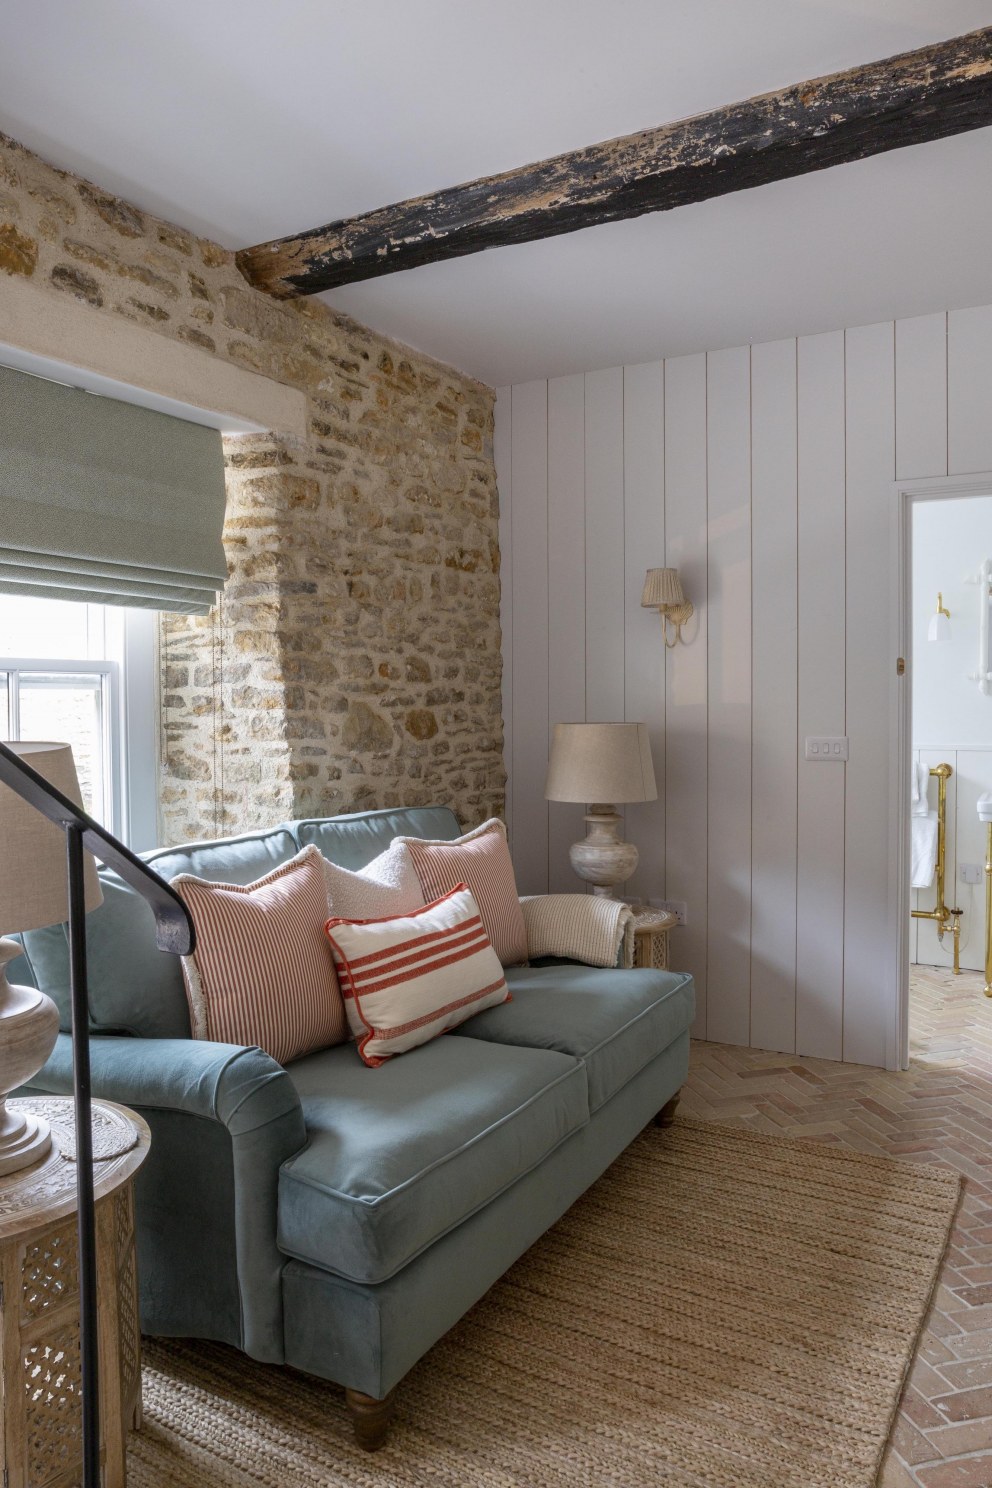 The Cottages | A cosy corner | Interior Designers